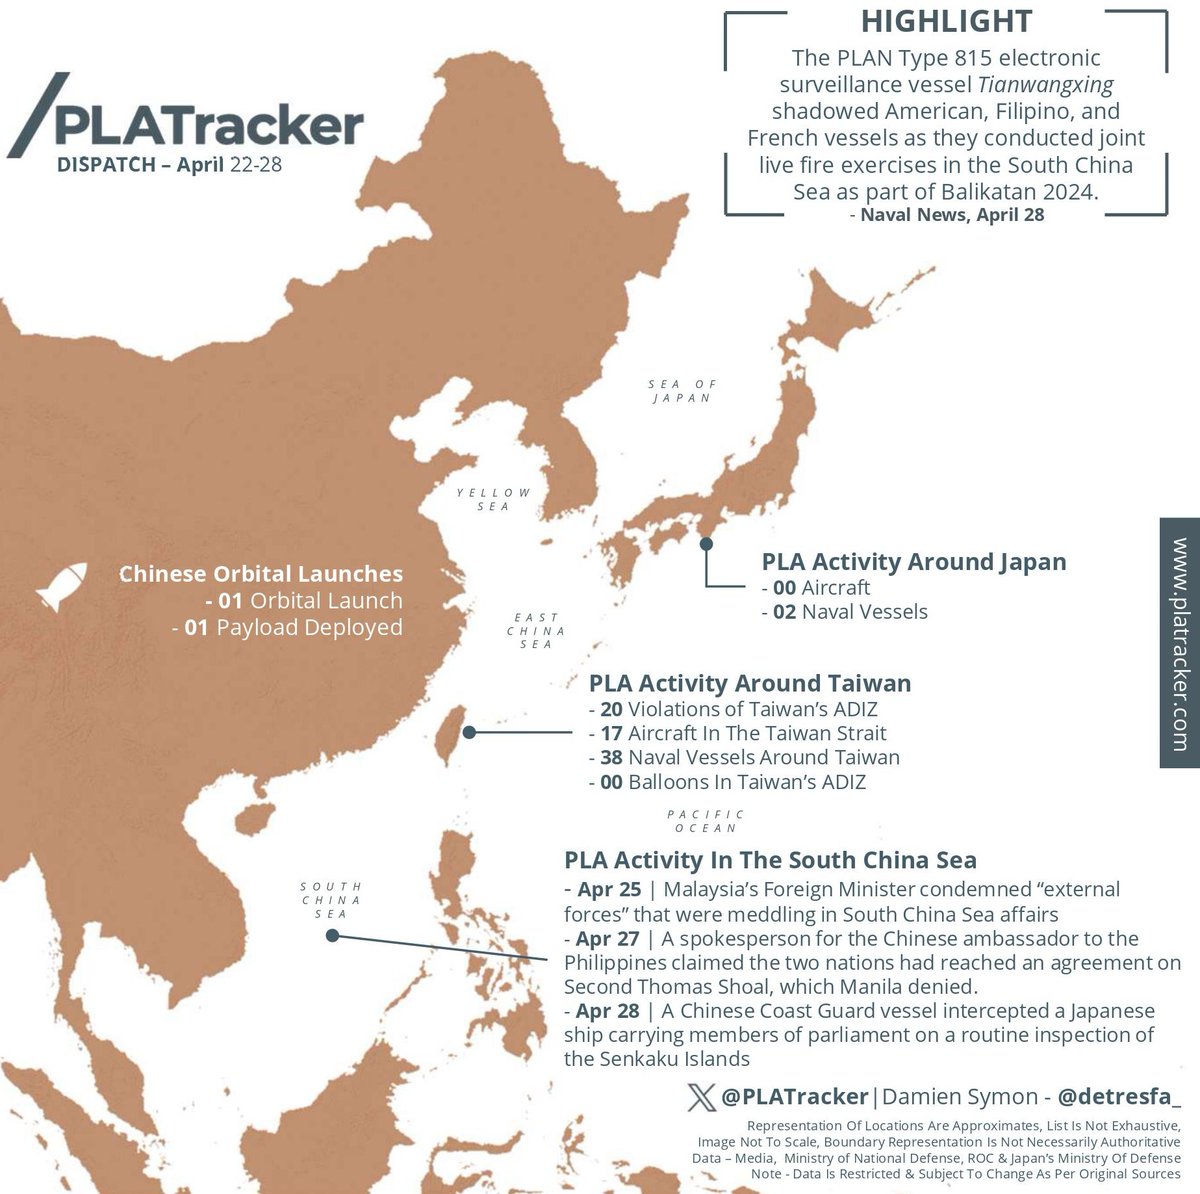 PLATracker DISPATCH 22 - 28 April 2024 Partnering with @detresfa_ we track heightened PLA activity around Taiwan, key developments in the South China Sea, and more: